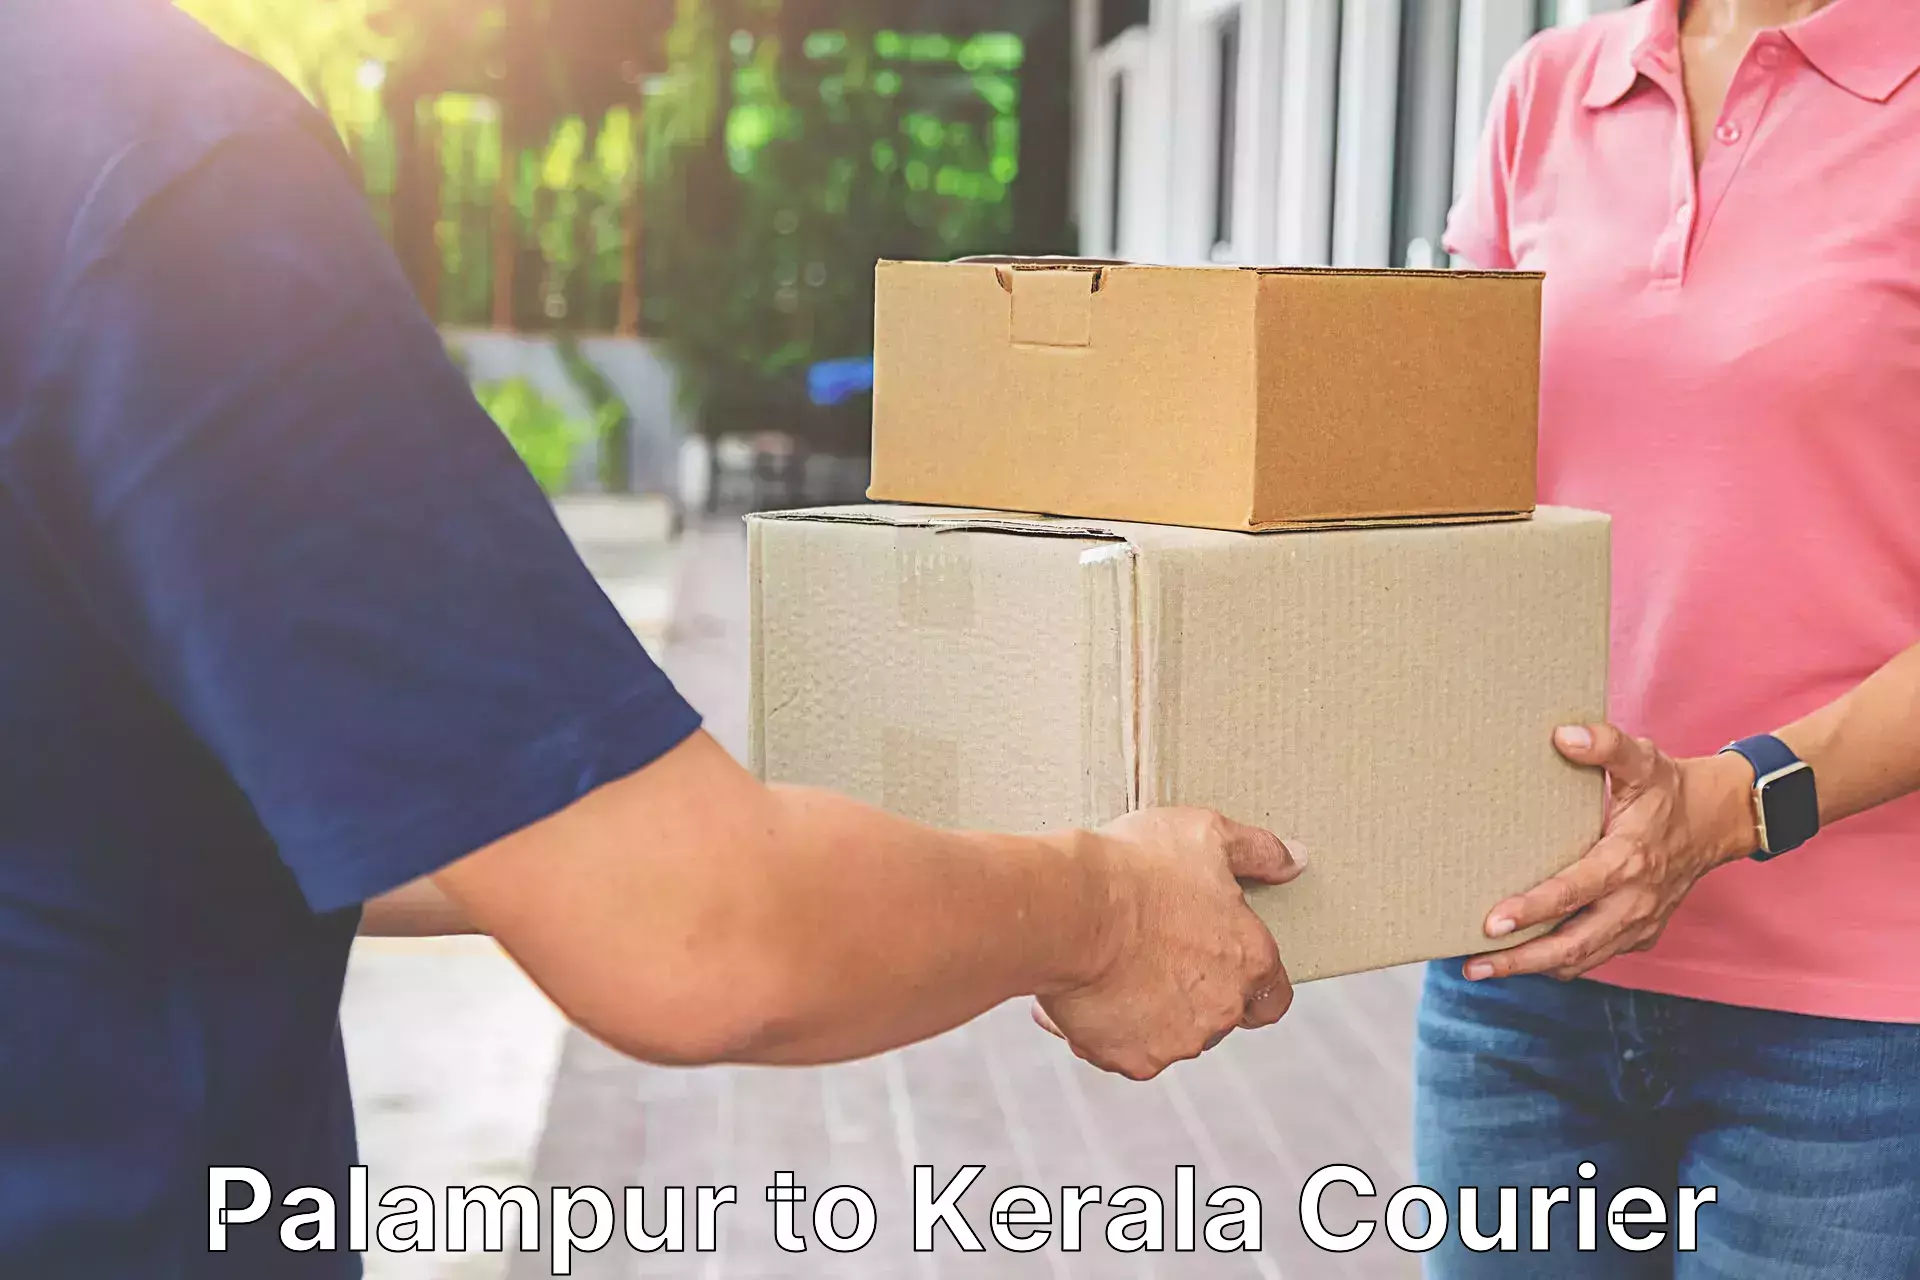 Speedy delivery service Palampur to Kerala